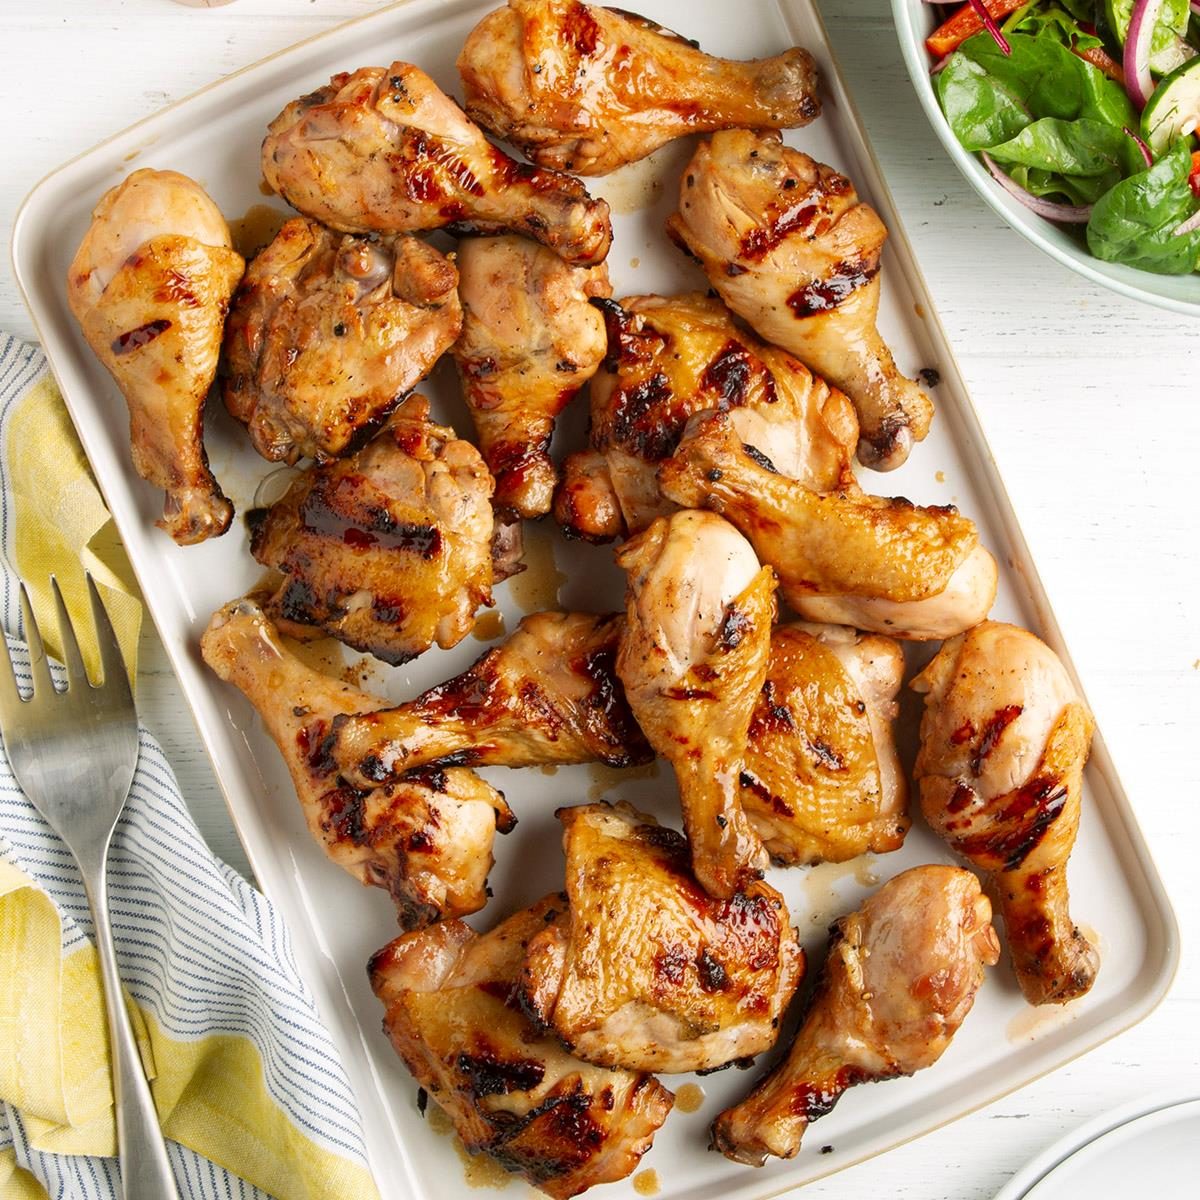 10 Ways To Cook Chicken (Recipes) I Taste of Home